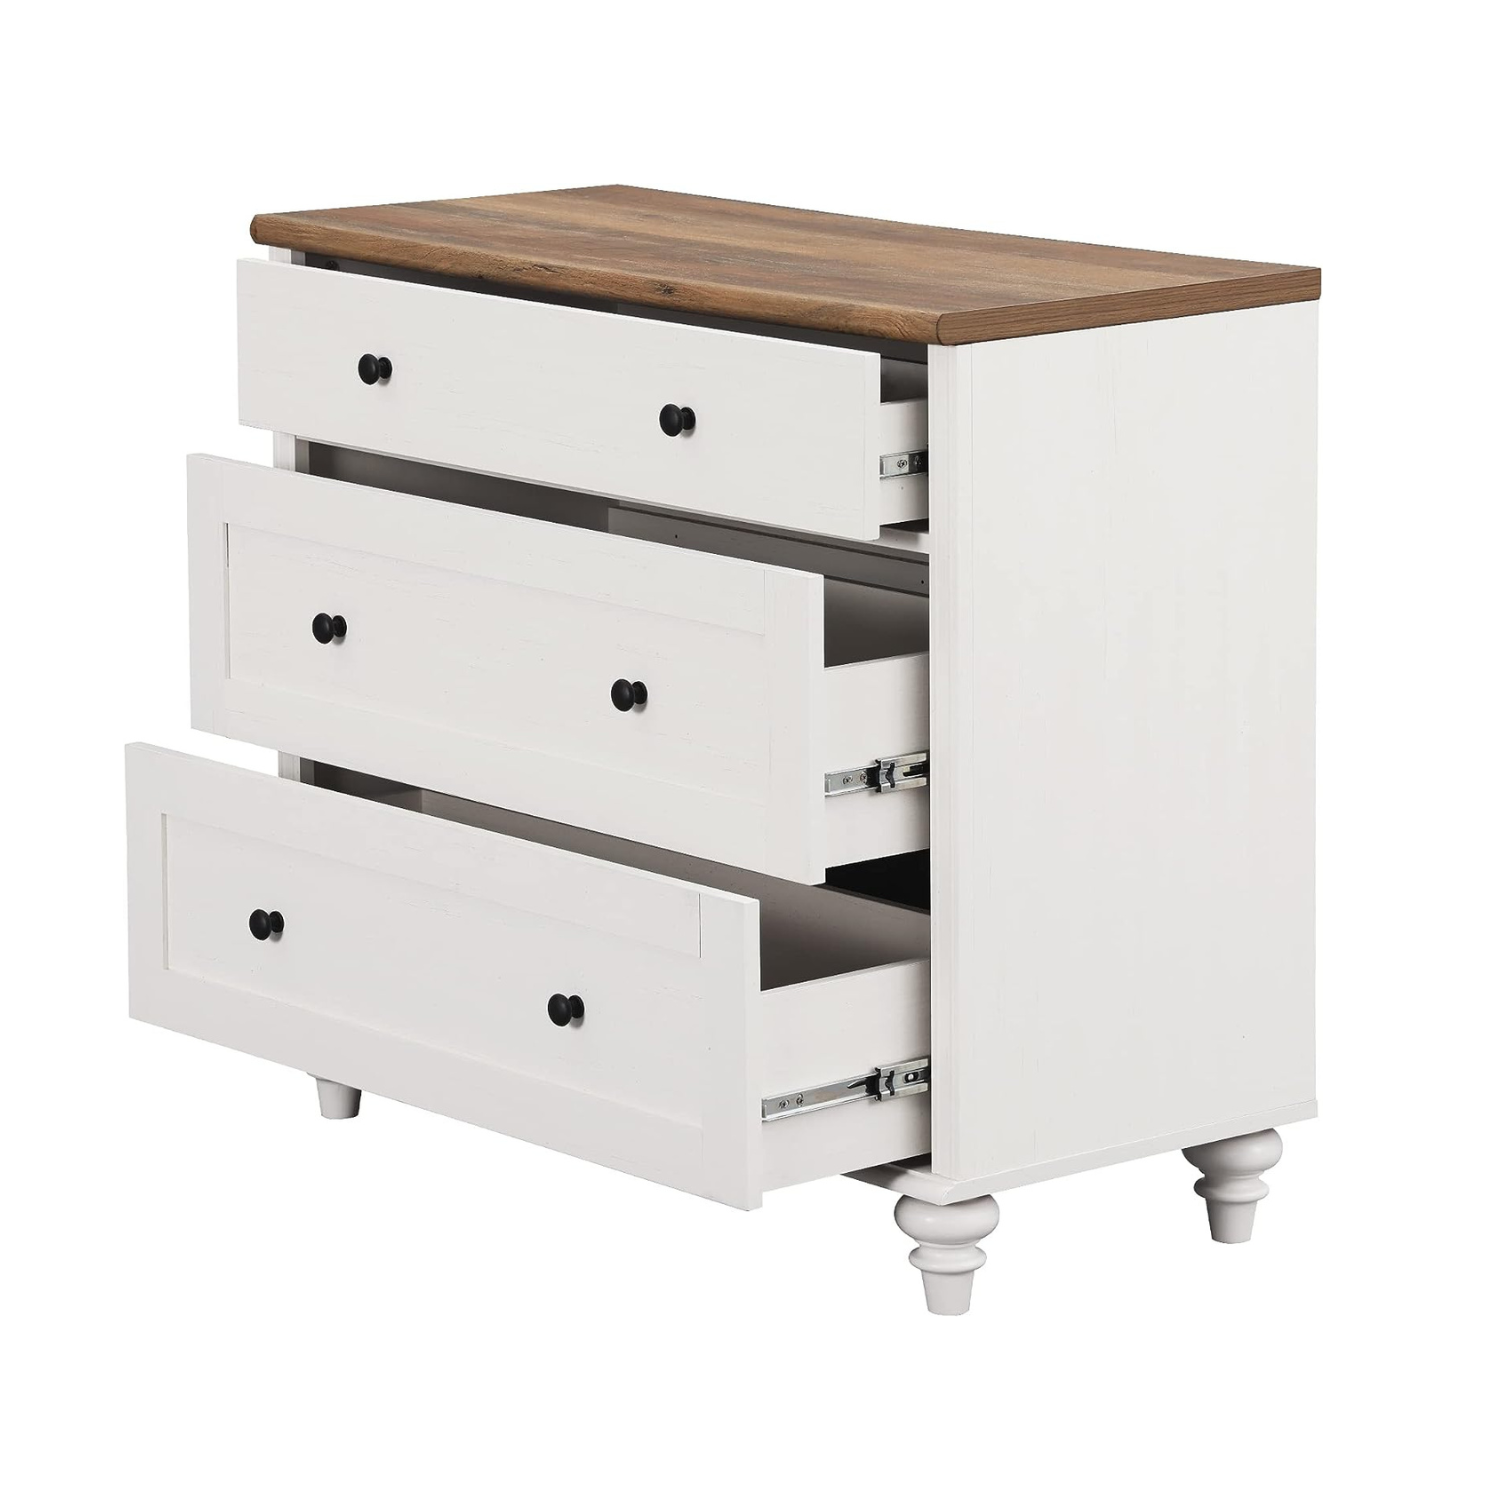 WAMPAT 67" Dresser for Bedroom with 6 Drawers, White Kids Dressers with Wide Chest of Drawers for Living Room, Nursery, Hallway